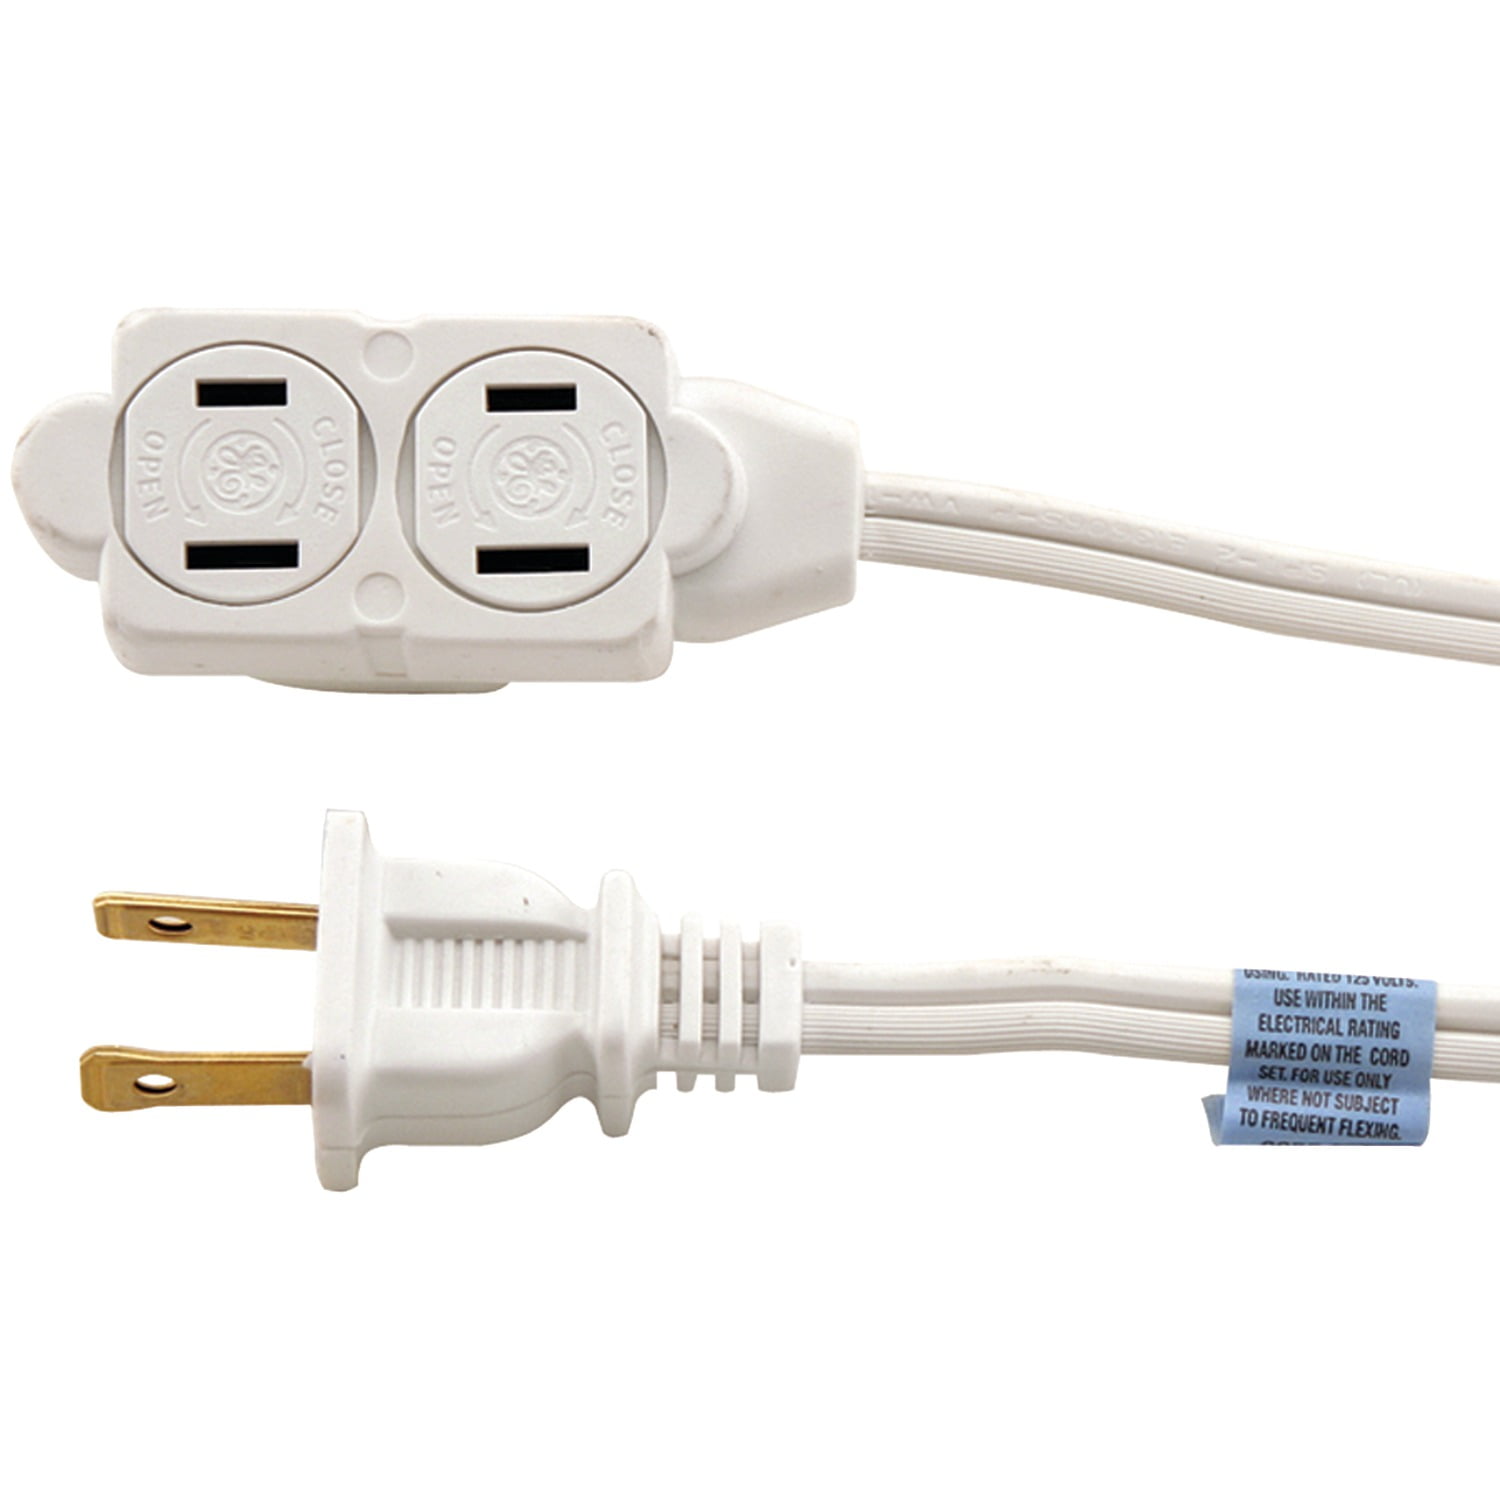 Extention Cord Heavy Duty 3 Outlet Grounded Indoor Home Office Prong 6 Ft White 